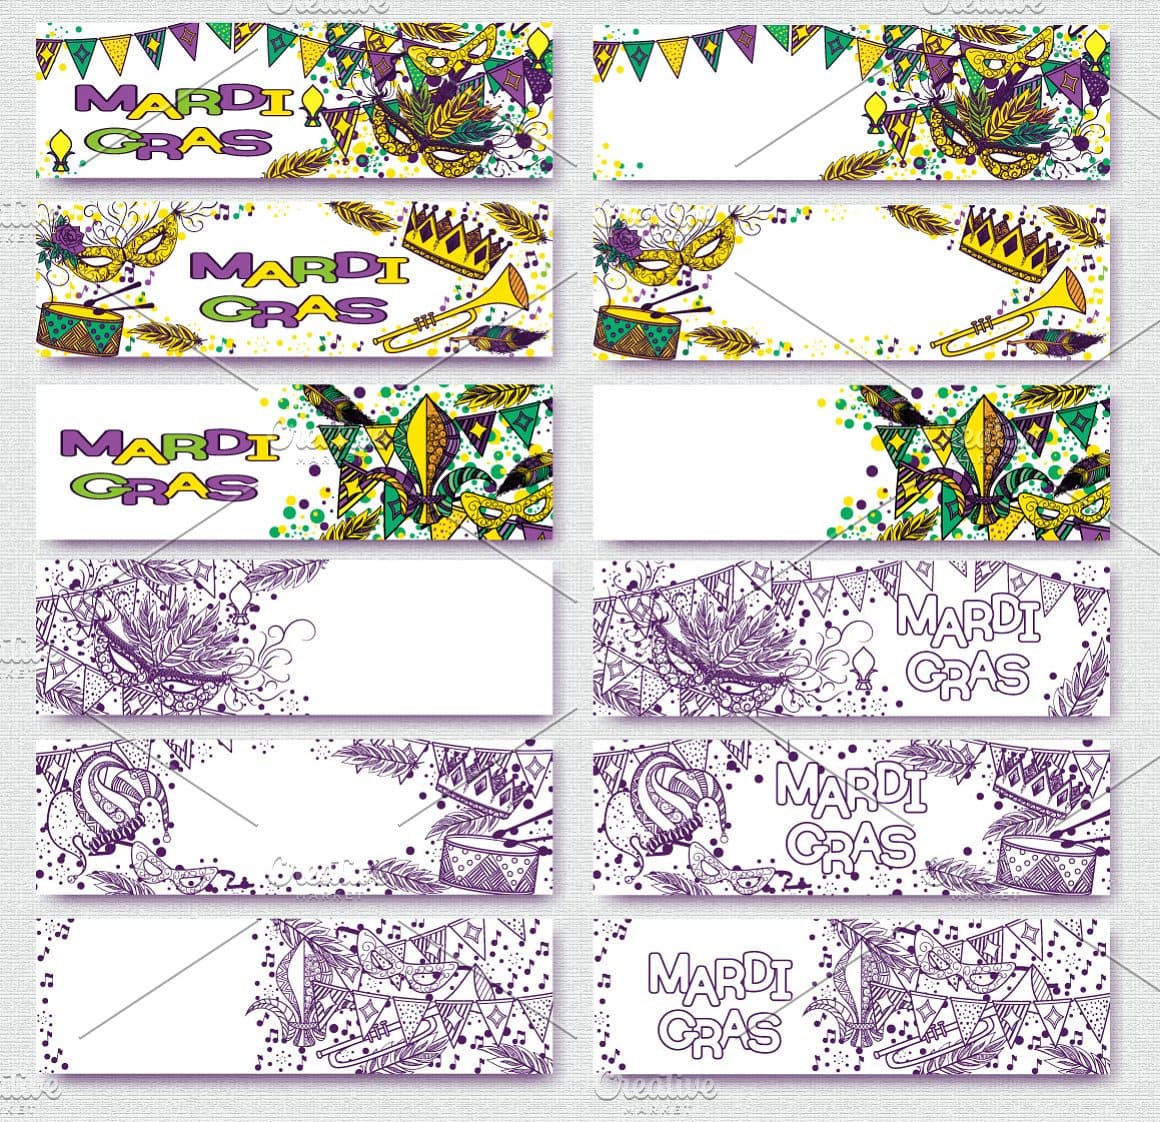 Two variants of patterns of Mardi Gras.